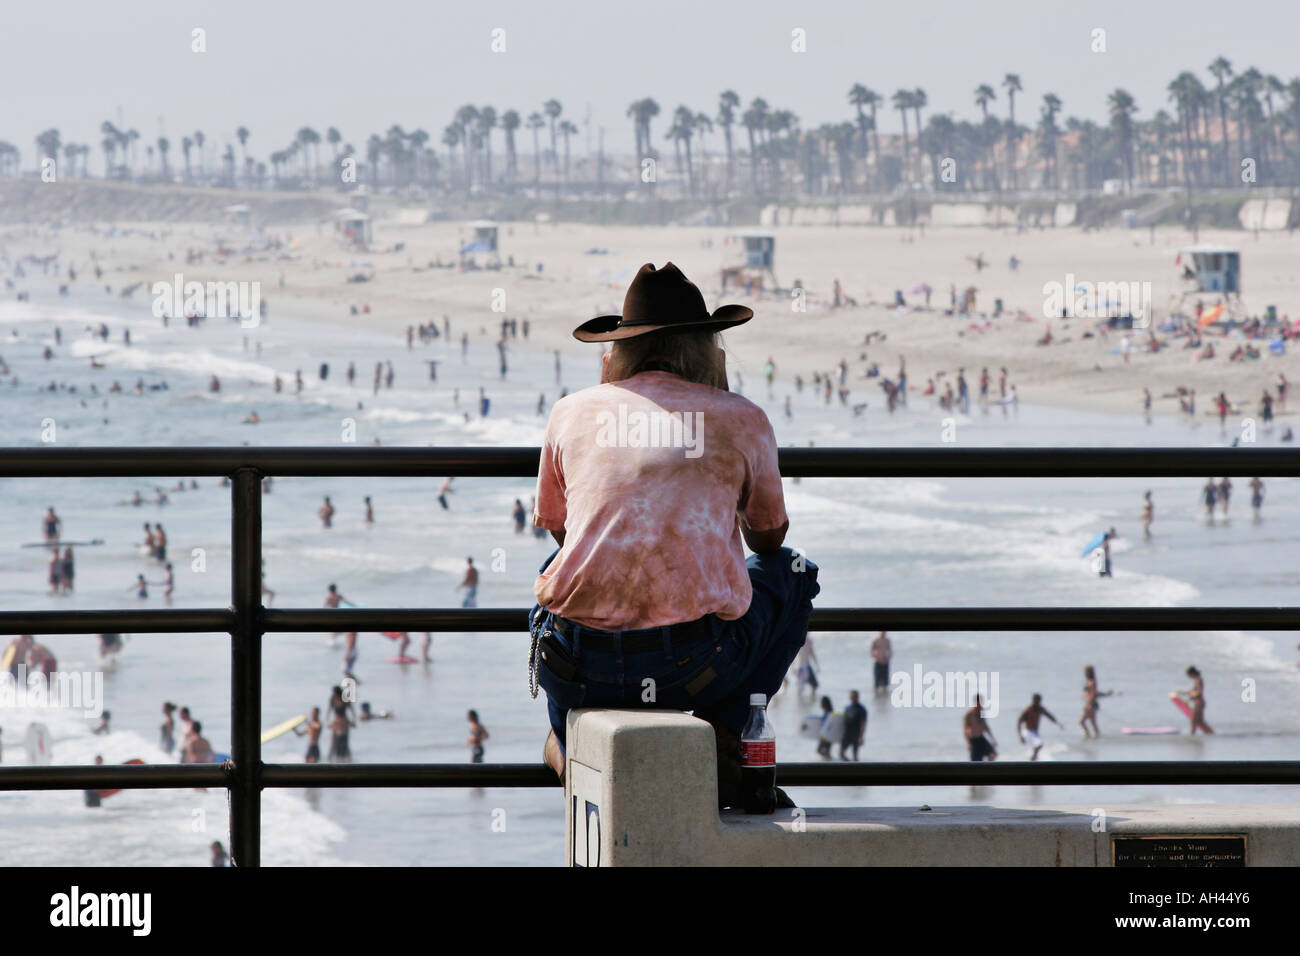 A man sitting on the pier in Huntington Beach California, watching the beach goers Stock Photo picture